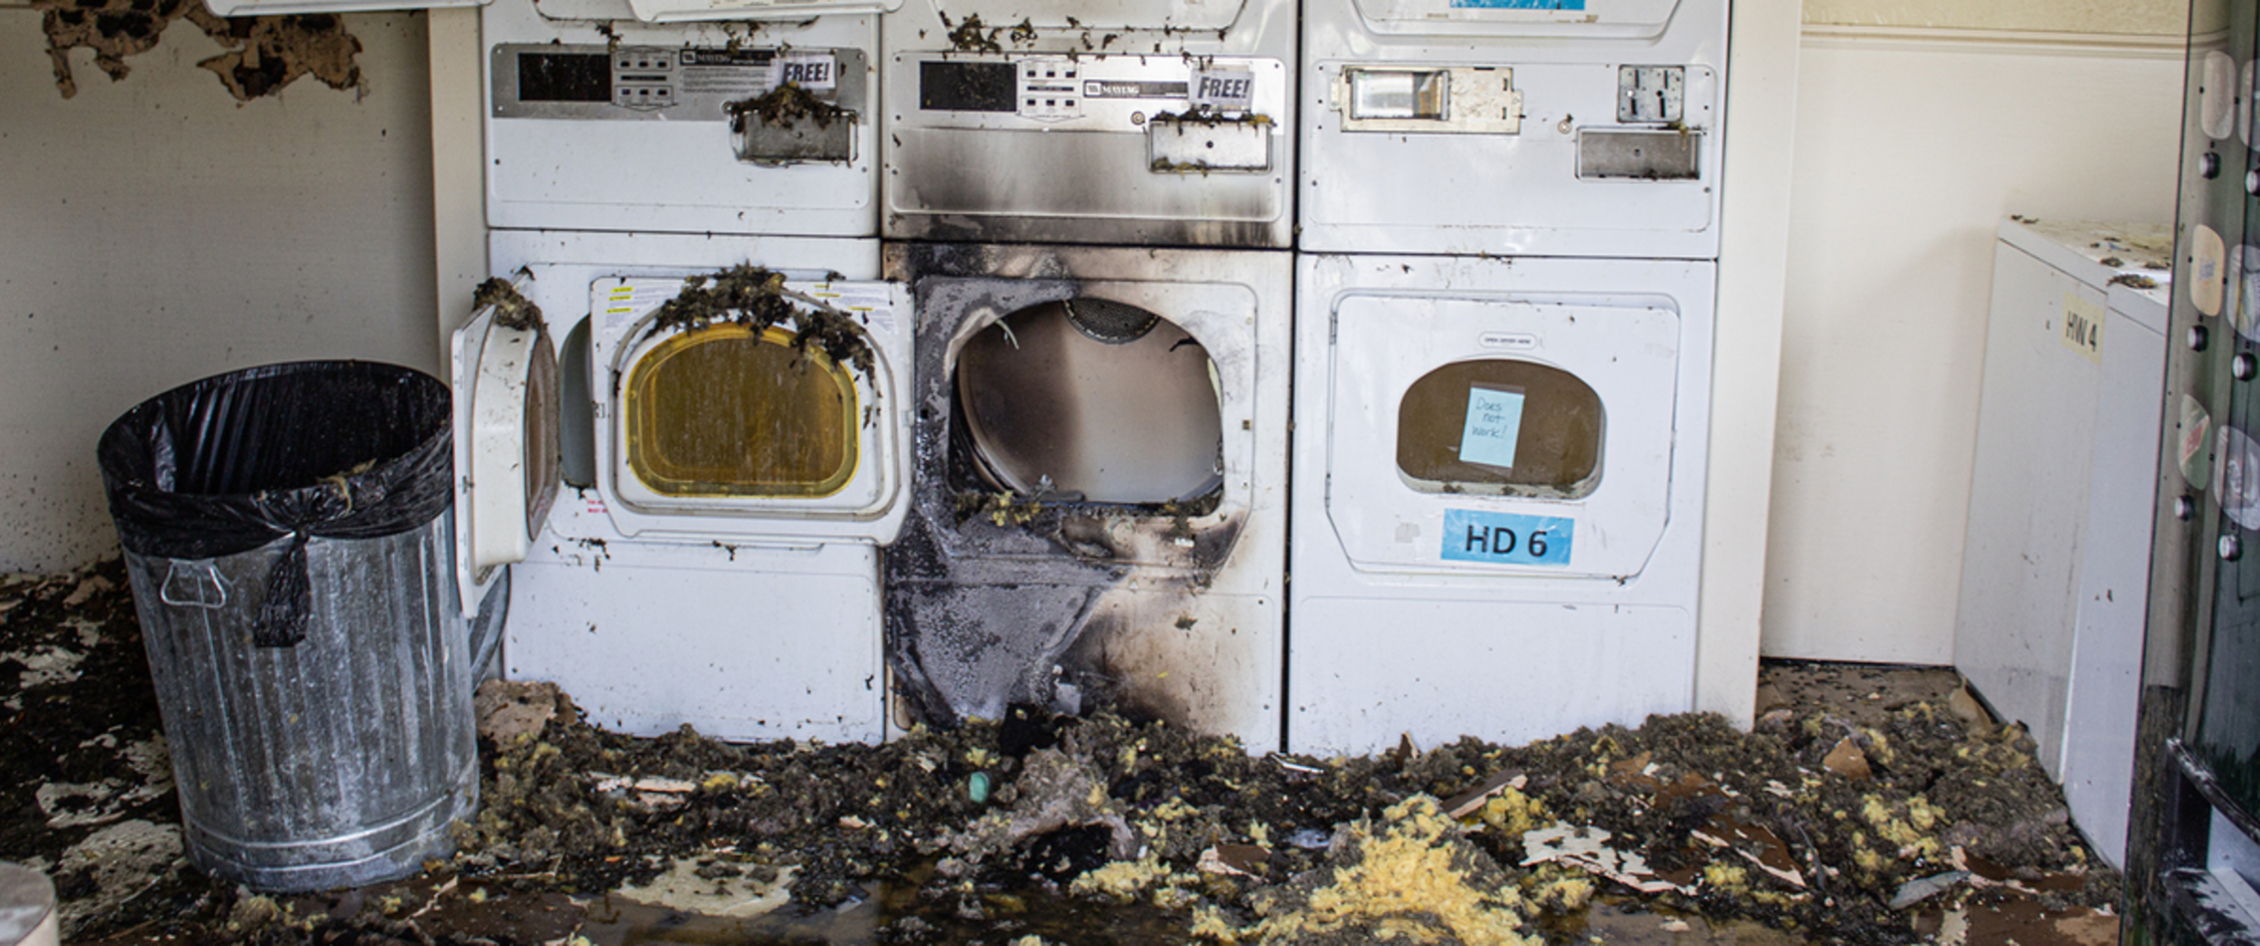 Fire in a laundromat.